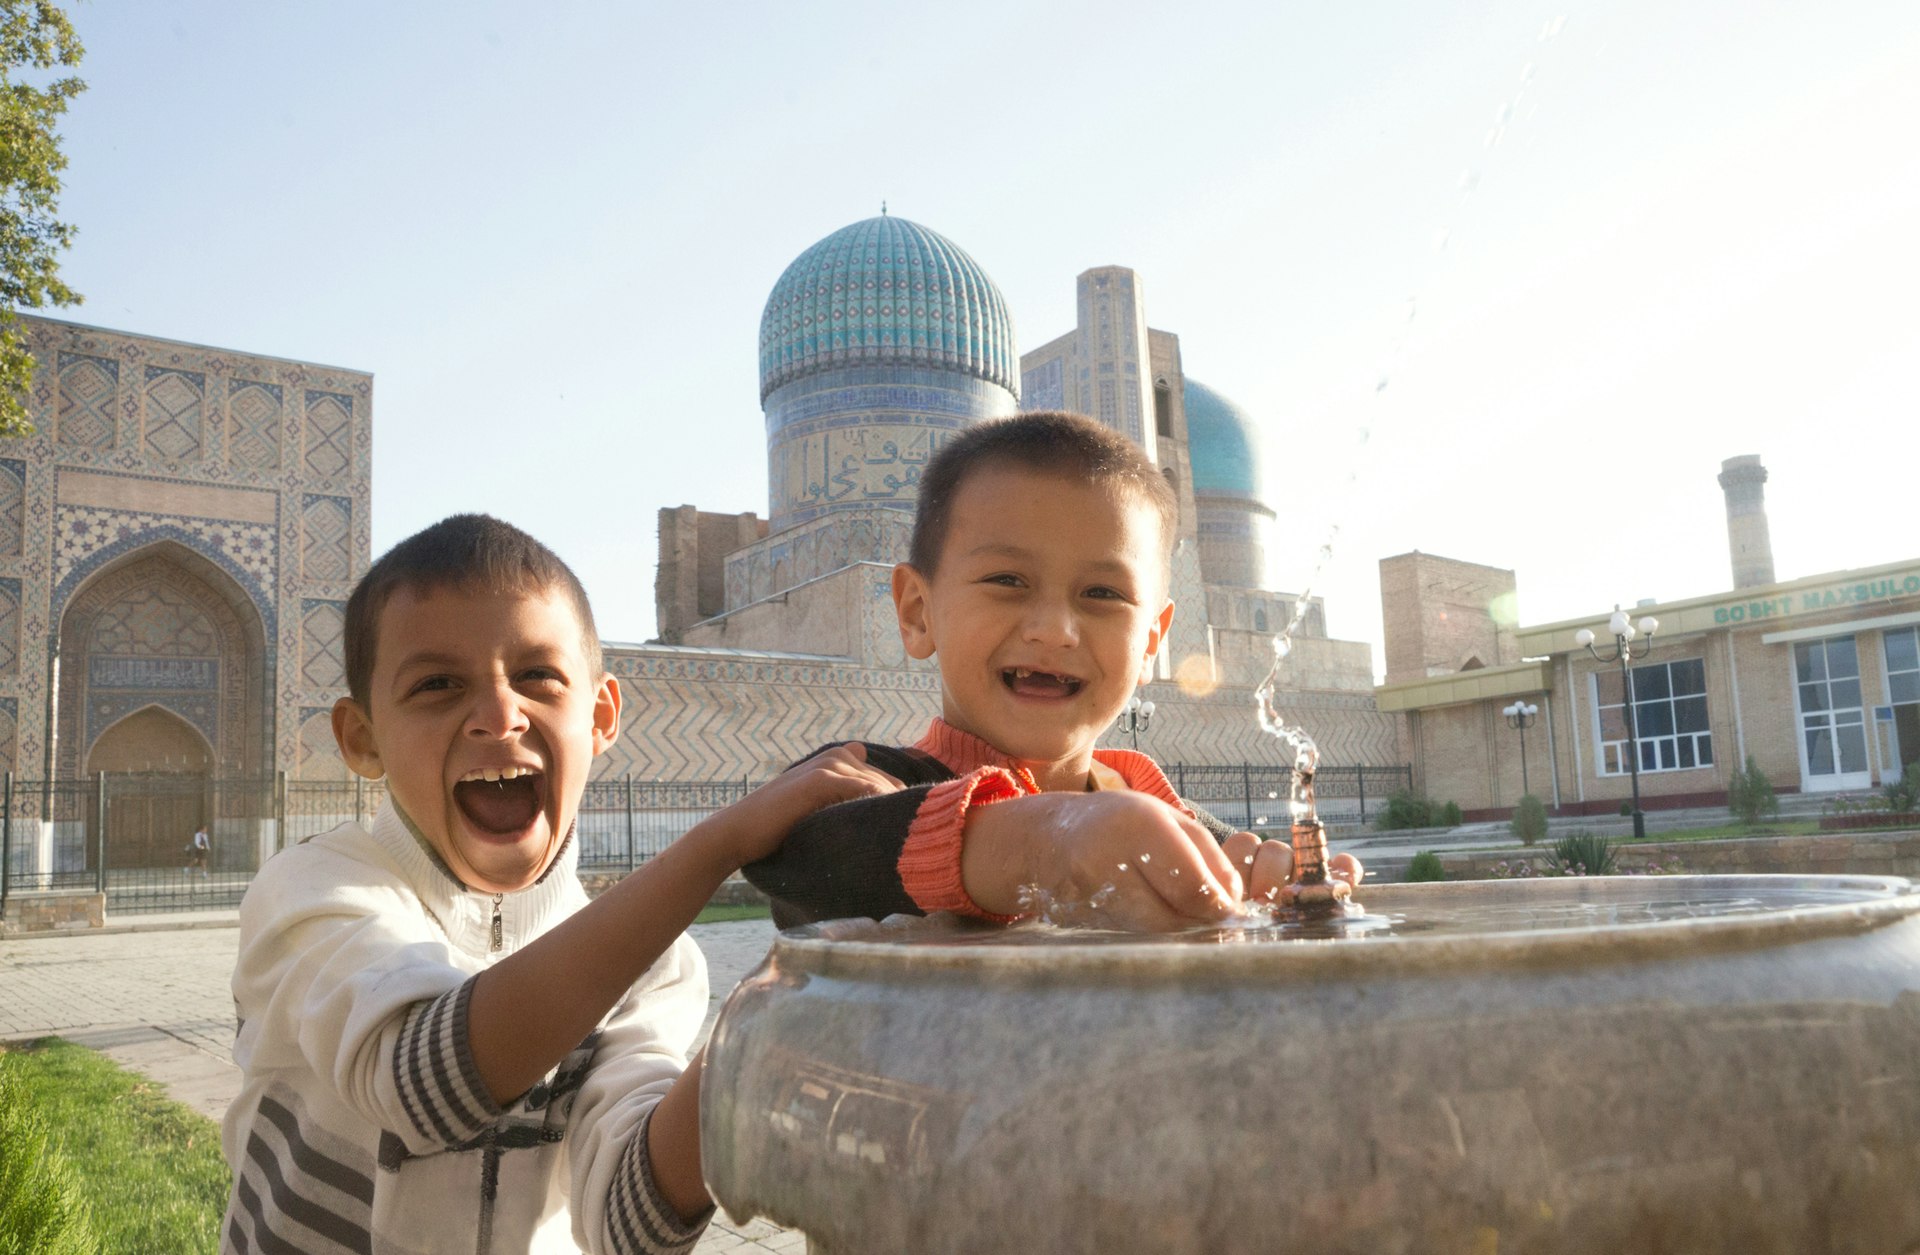 Two boys splash in a small water fountain in front of a domed and tiled mosque